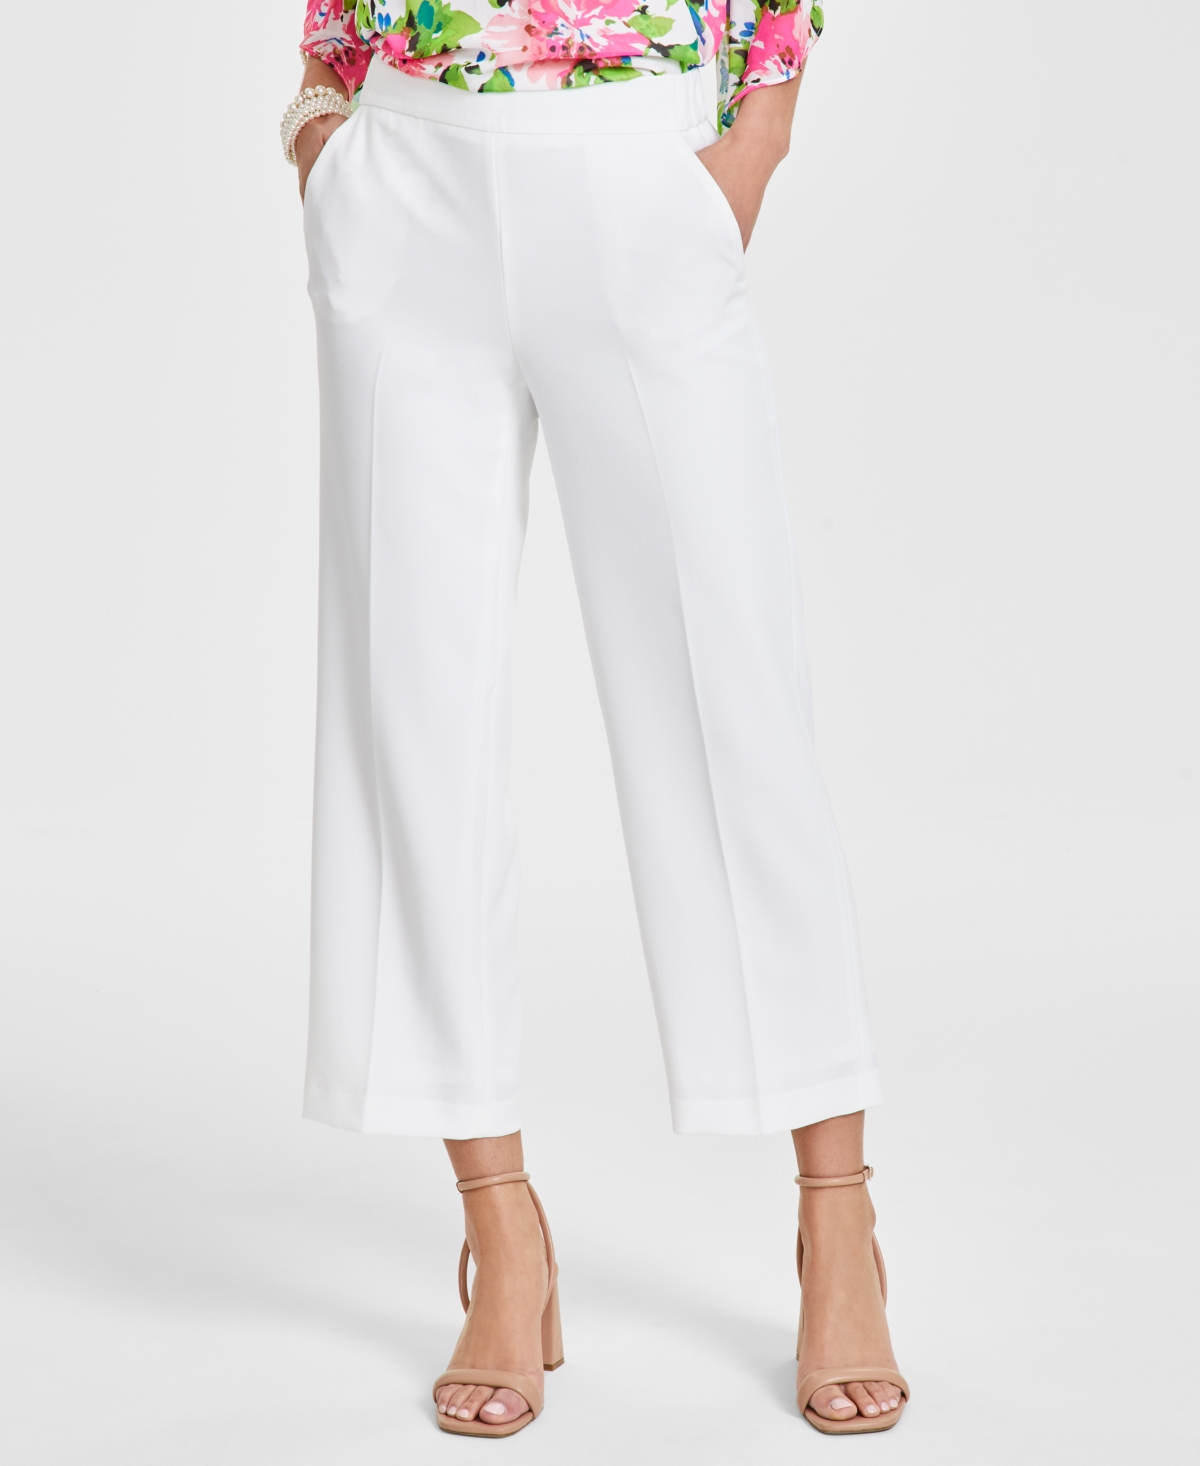 Women's Stretch Crepe High Rise Pull-On Pants - Lily White